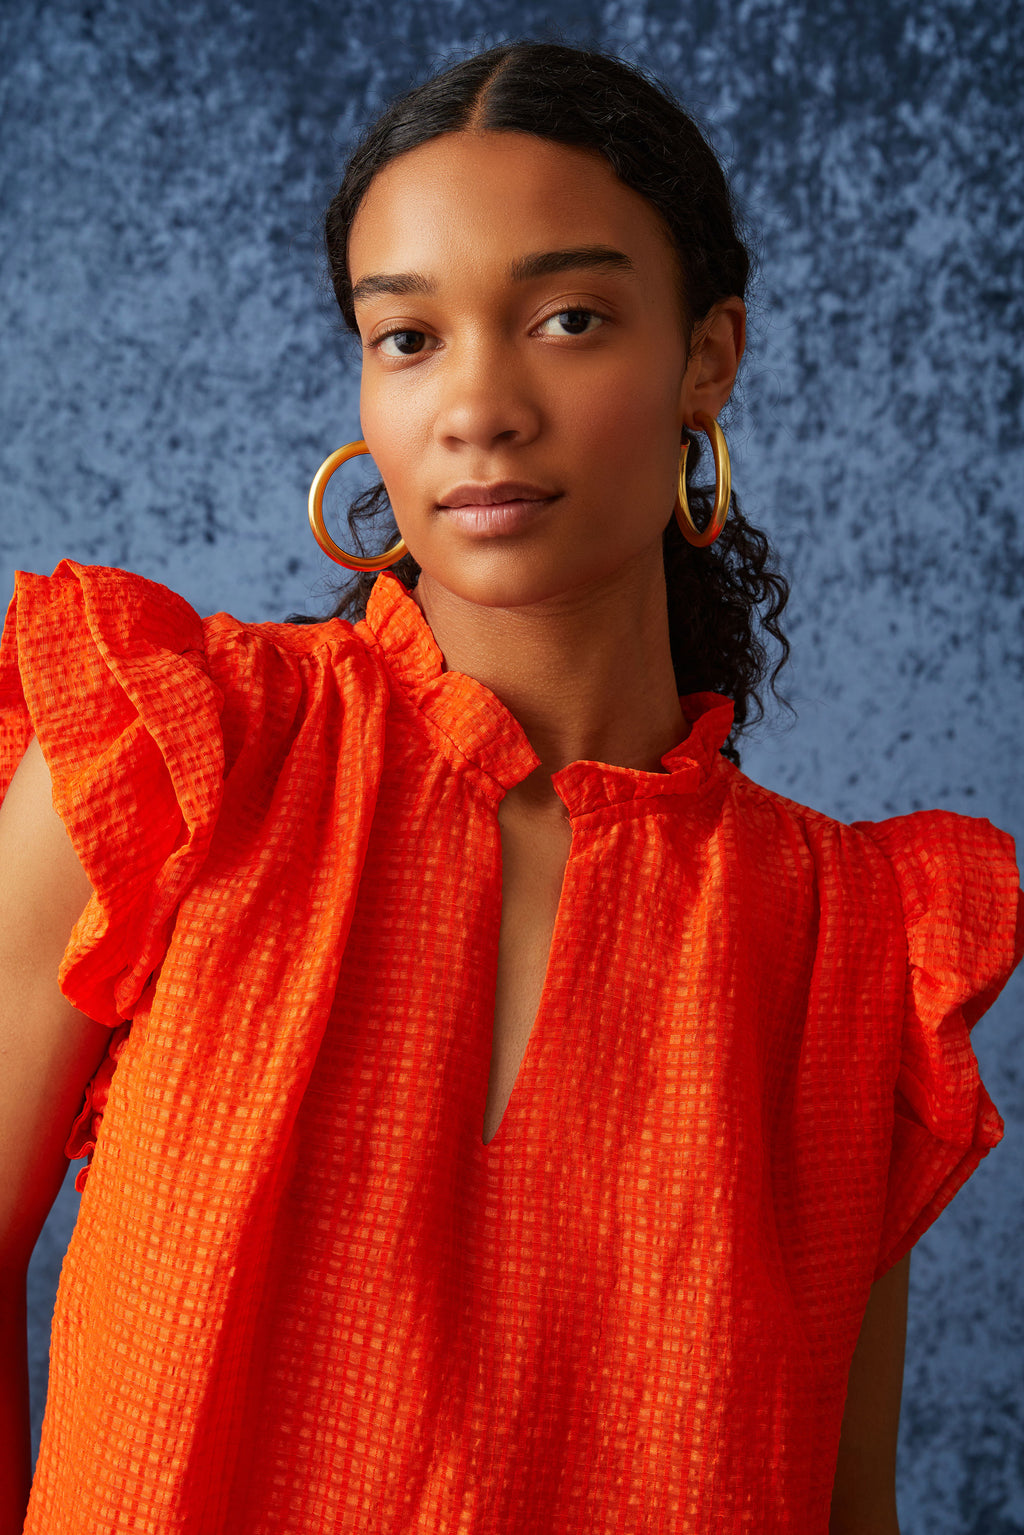 Short ruffle sleeve blouse with v-neck in a solid orange color